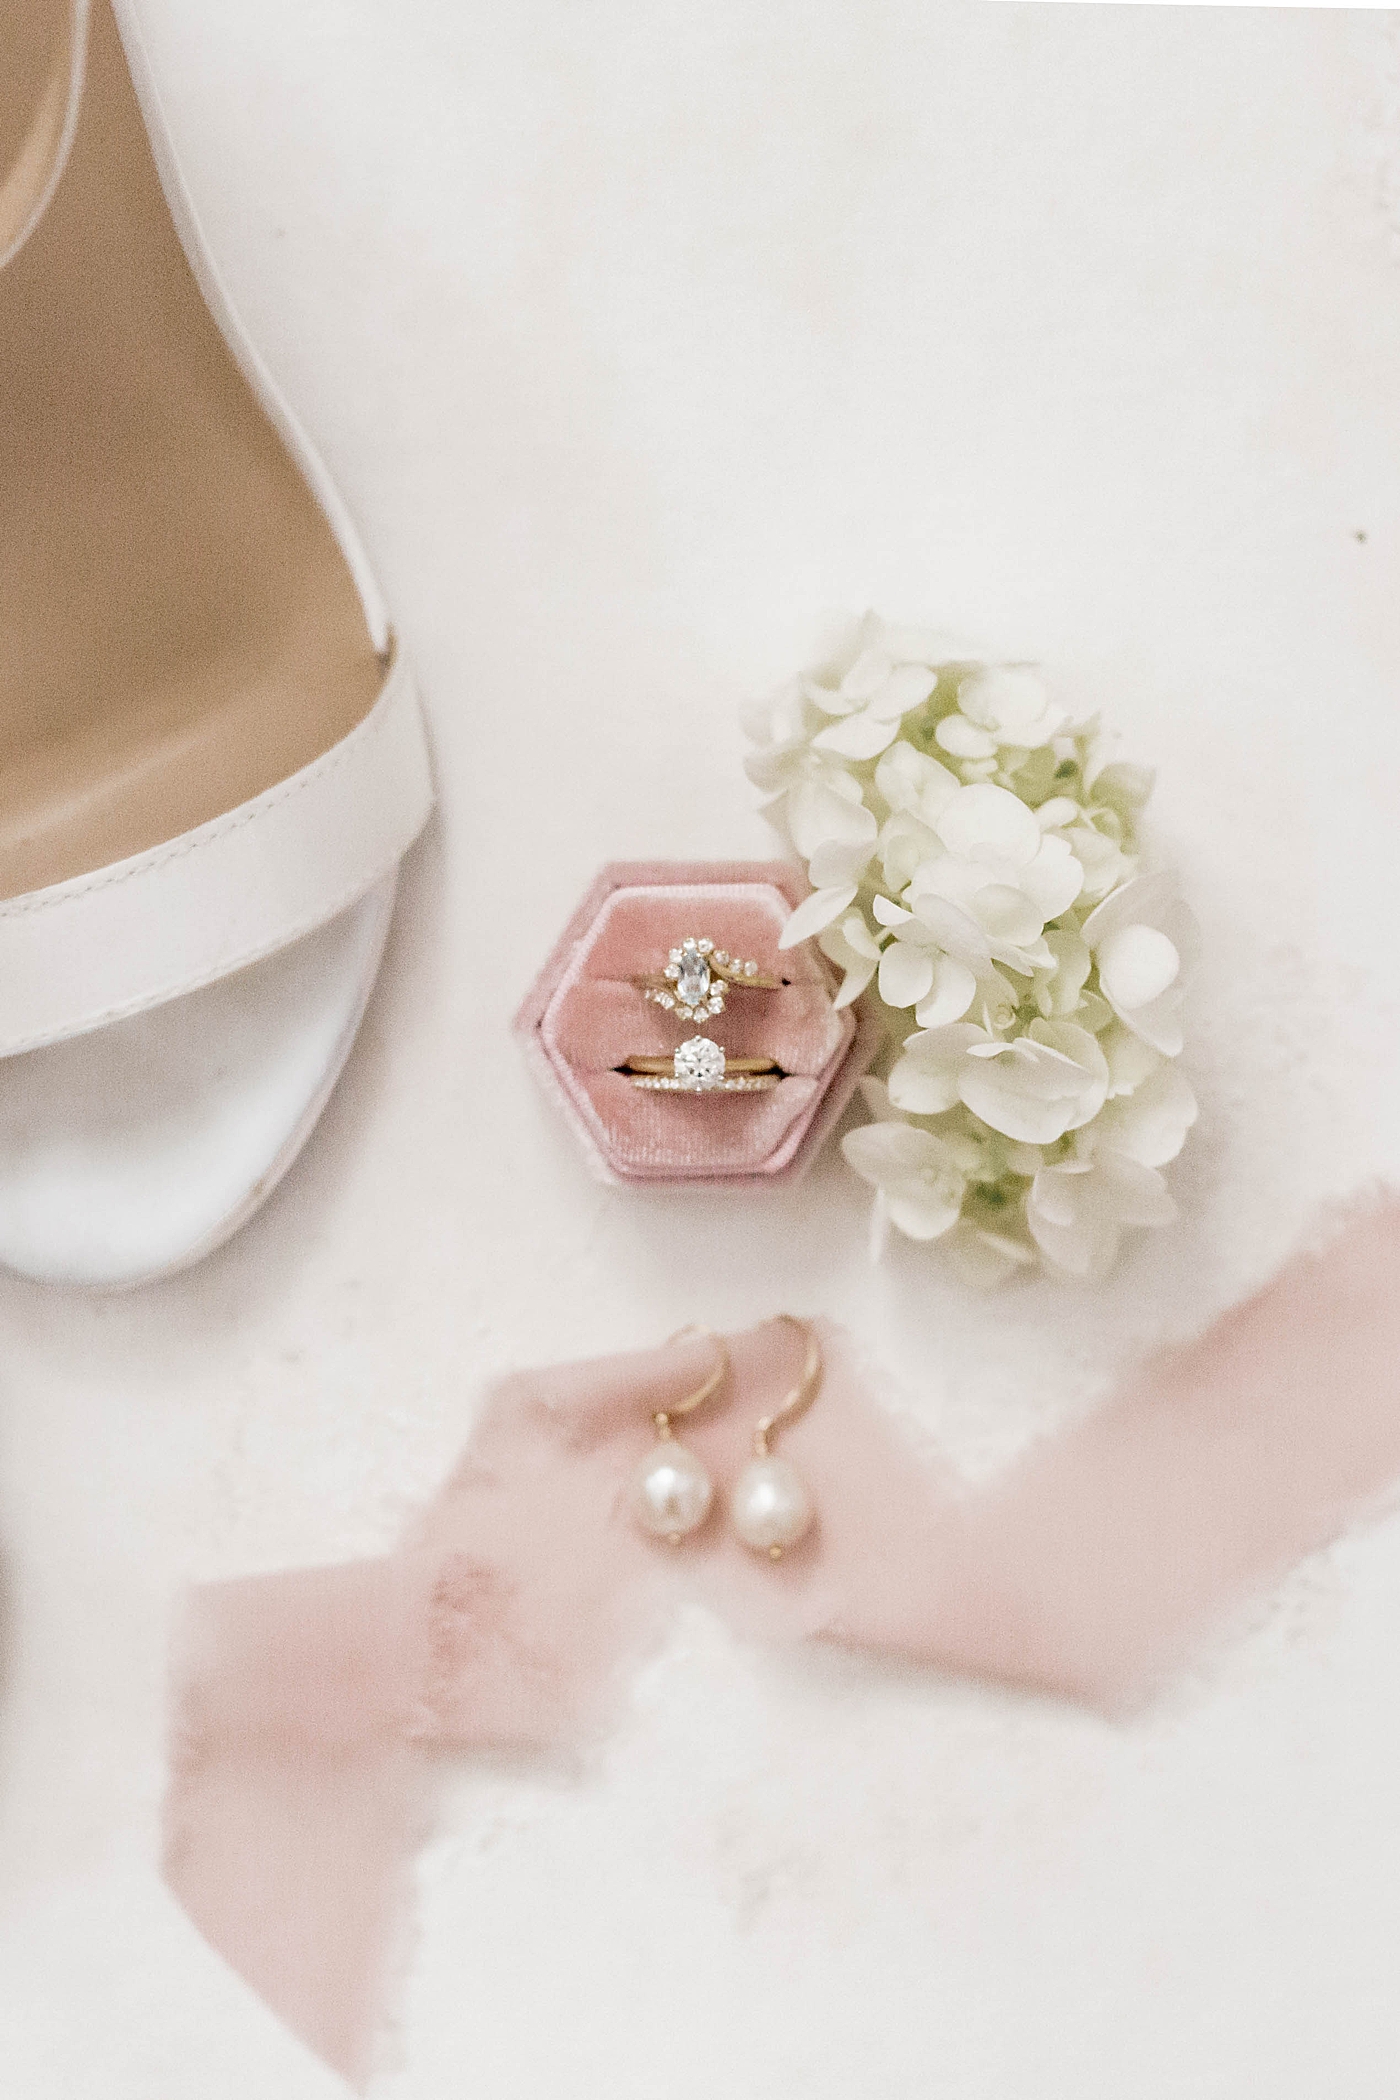 Wedding rings in a pink ring box with pearl earrings | Carters Event Co